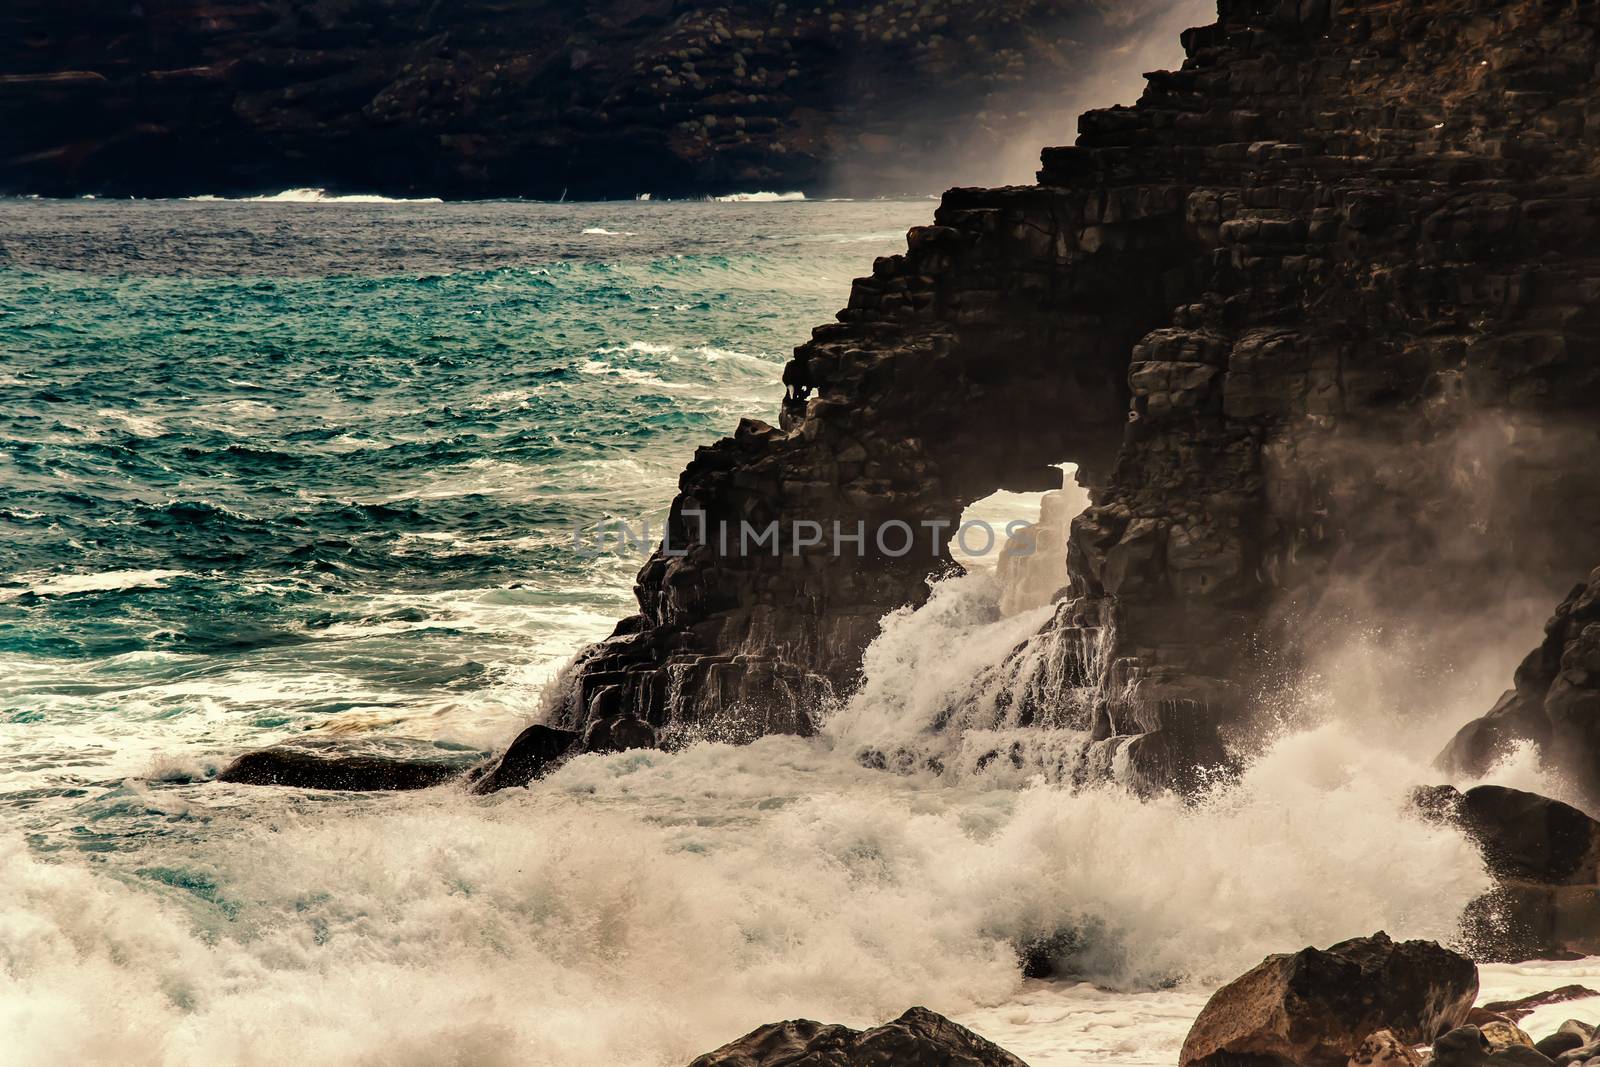 Ocean waves splash through, hole in rocks. Cave formation at shoreline in Tenerife. Aqua foam power scene. Stormy wave splashing with danger energy. Shore cliffs postcard vacations photography.